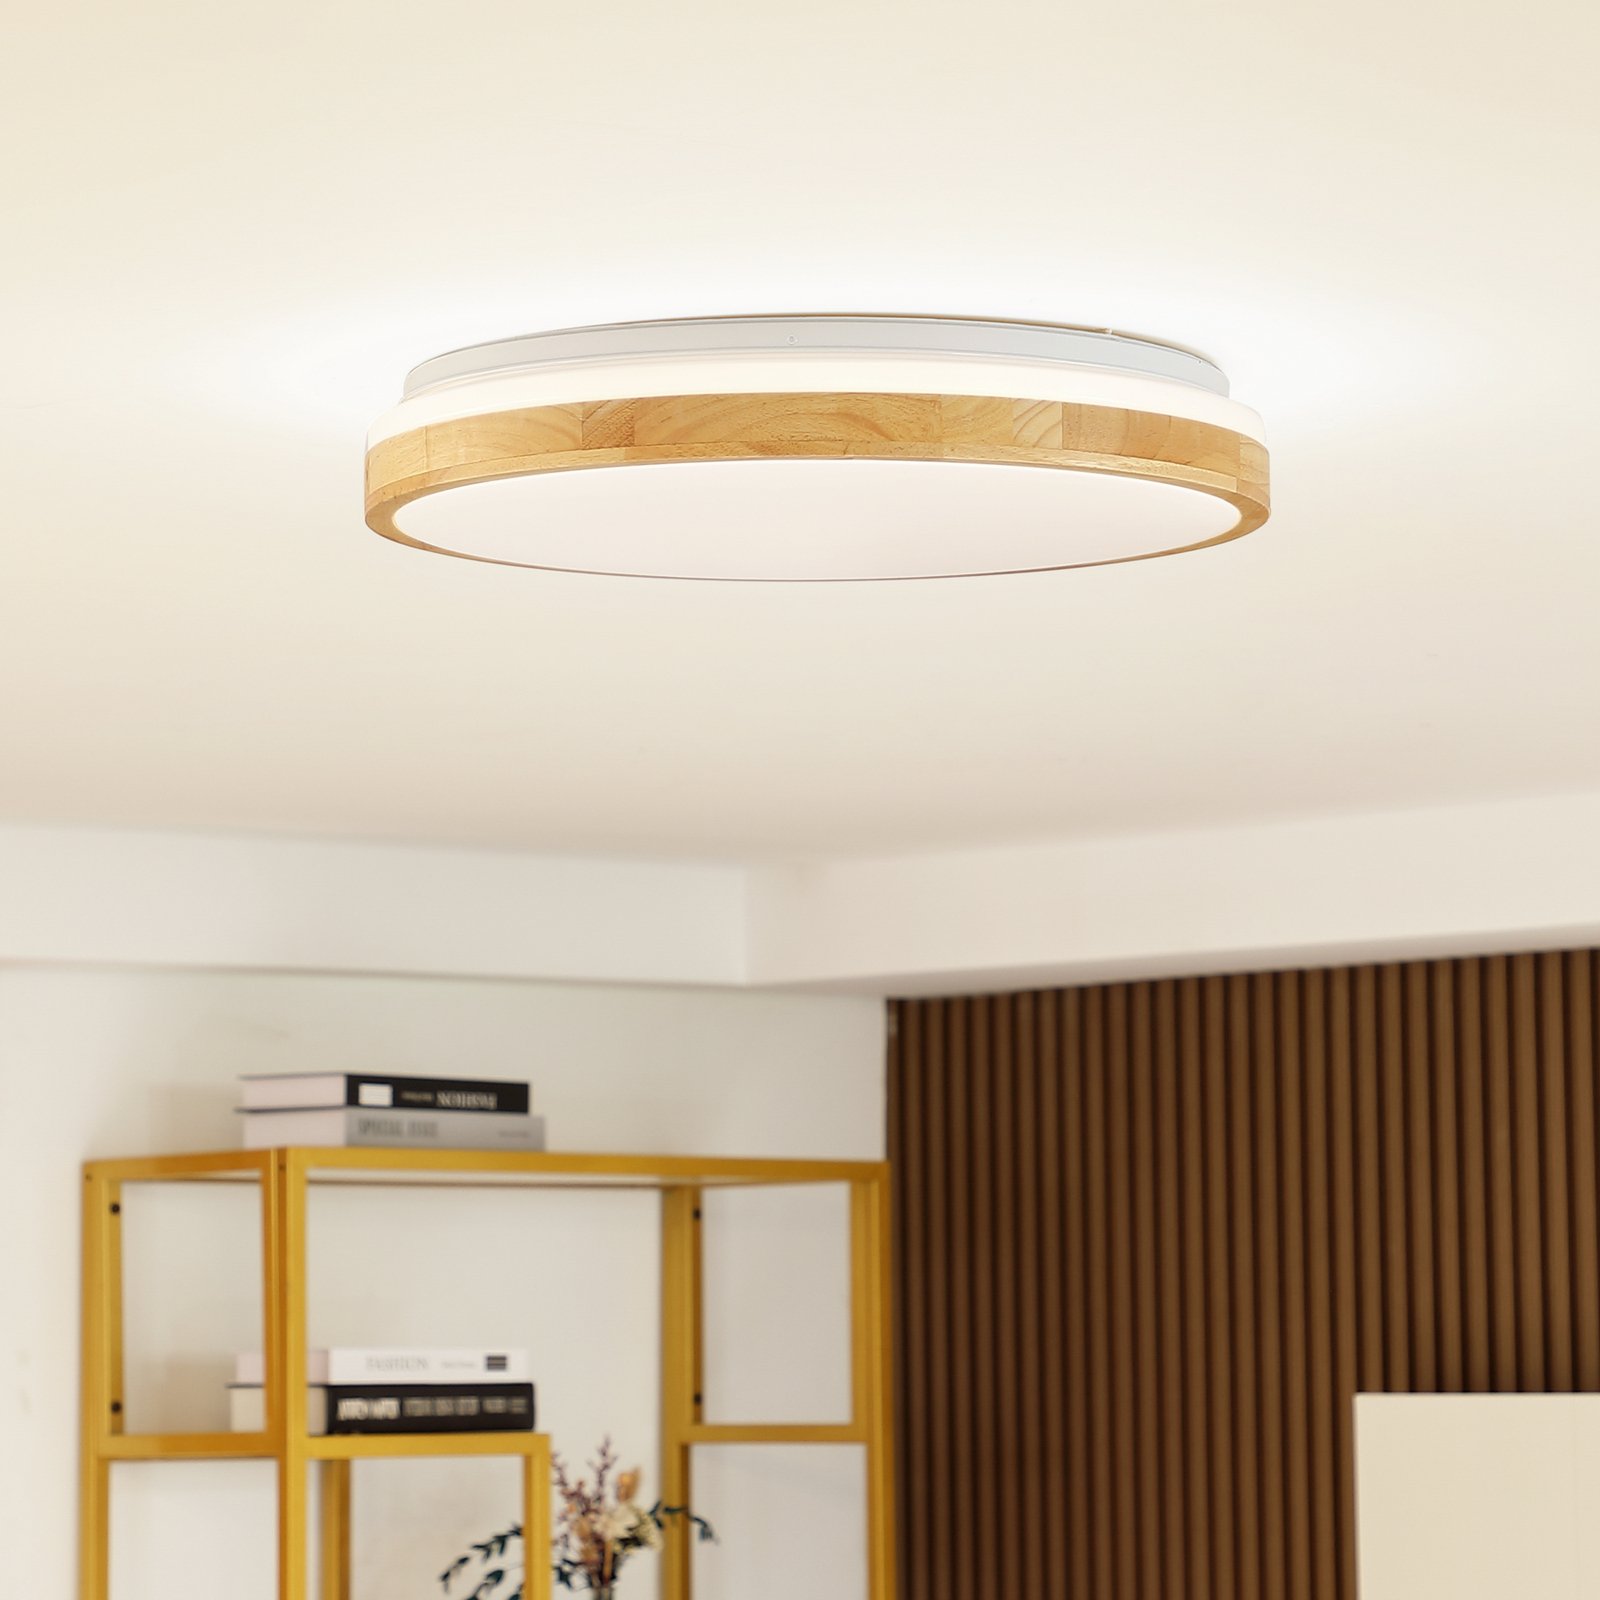 Lindby Emiva ceiling lamp, light strip at the top